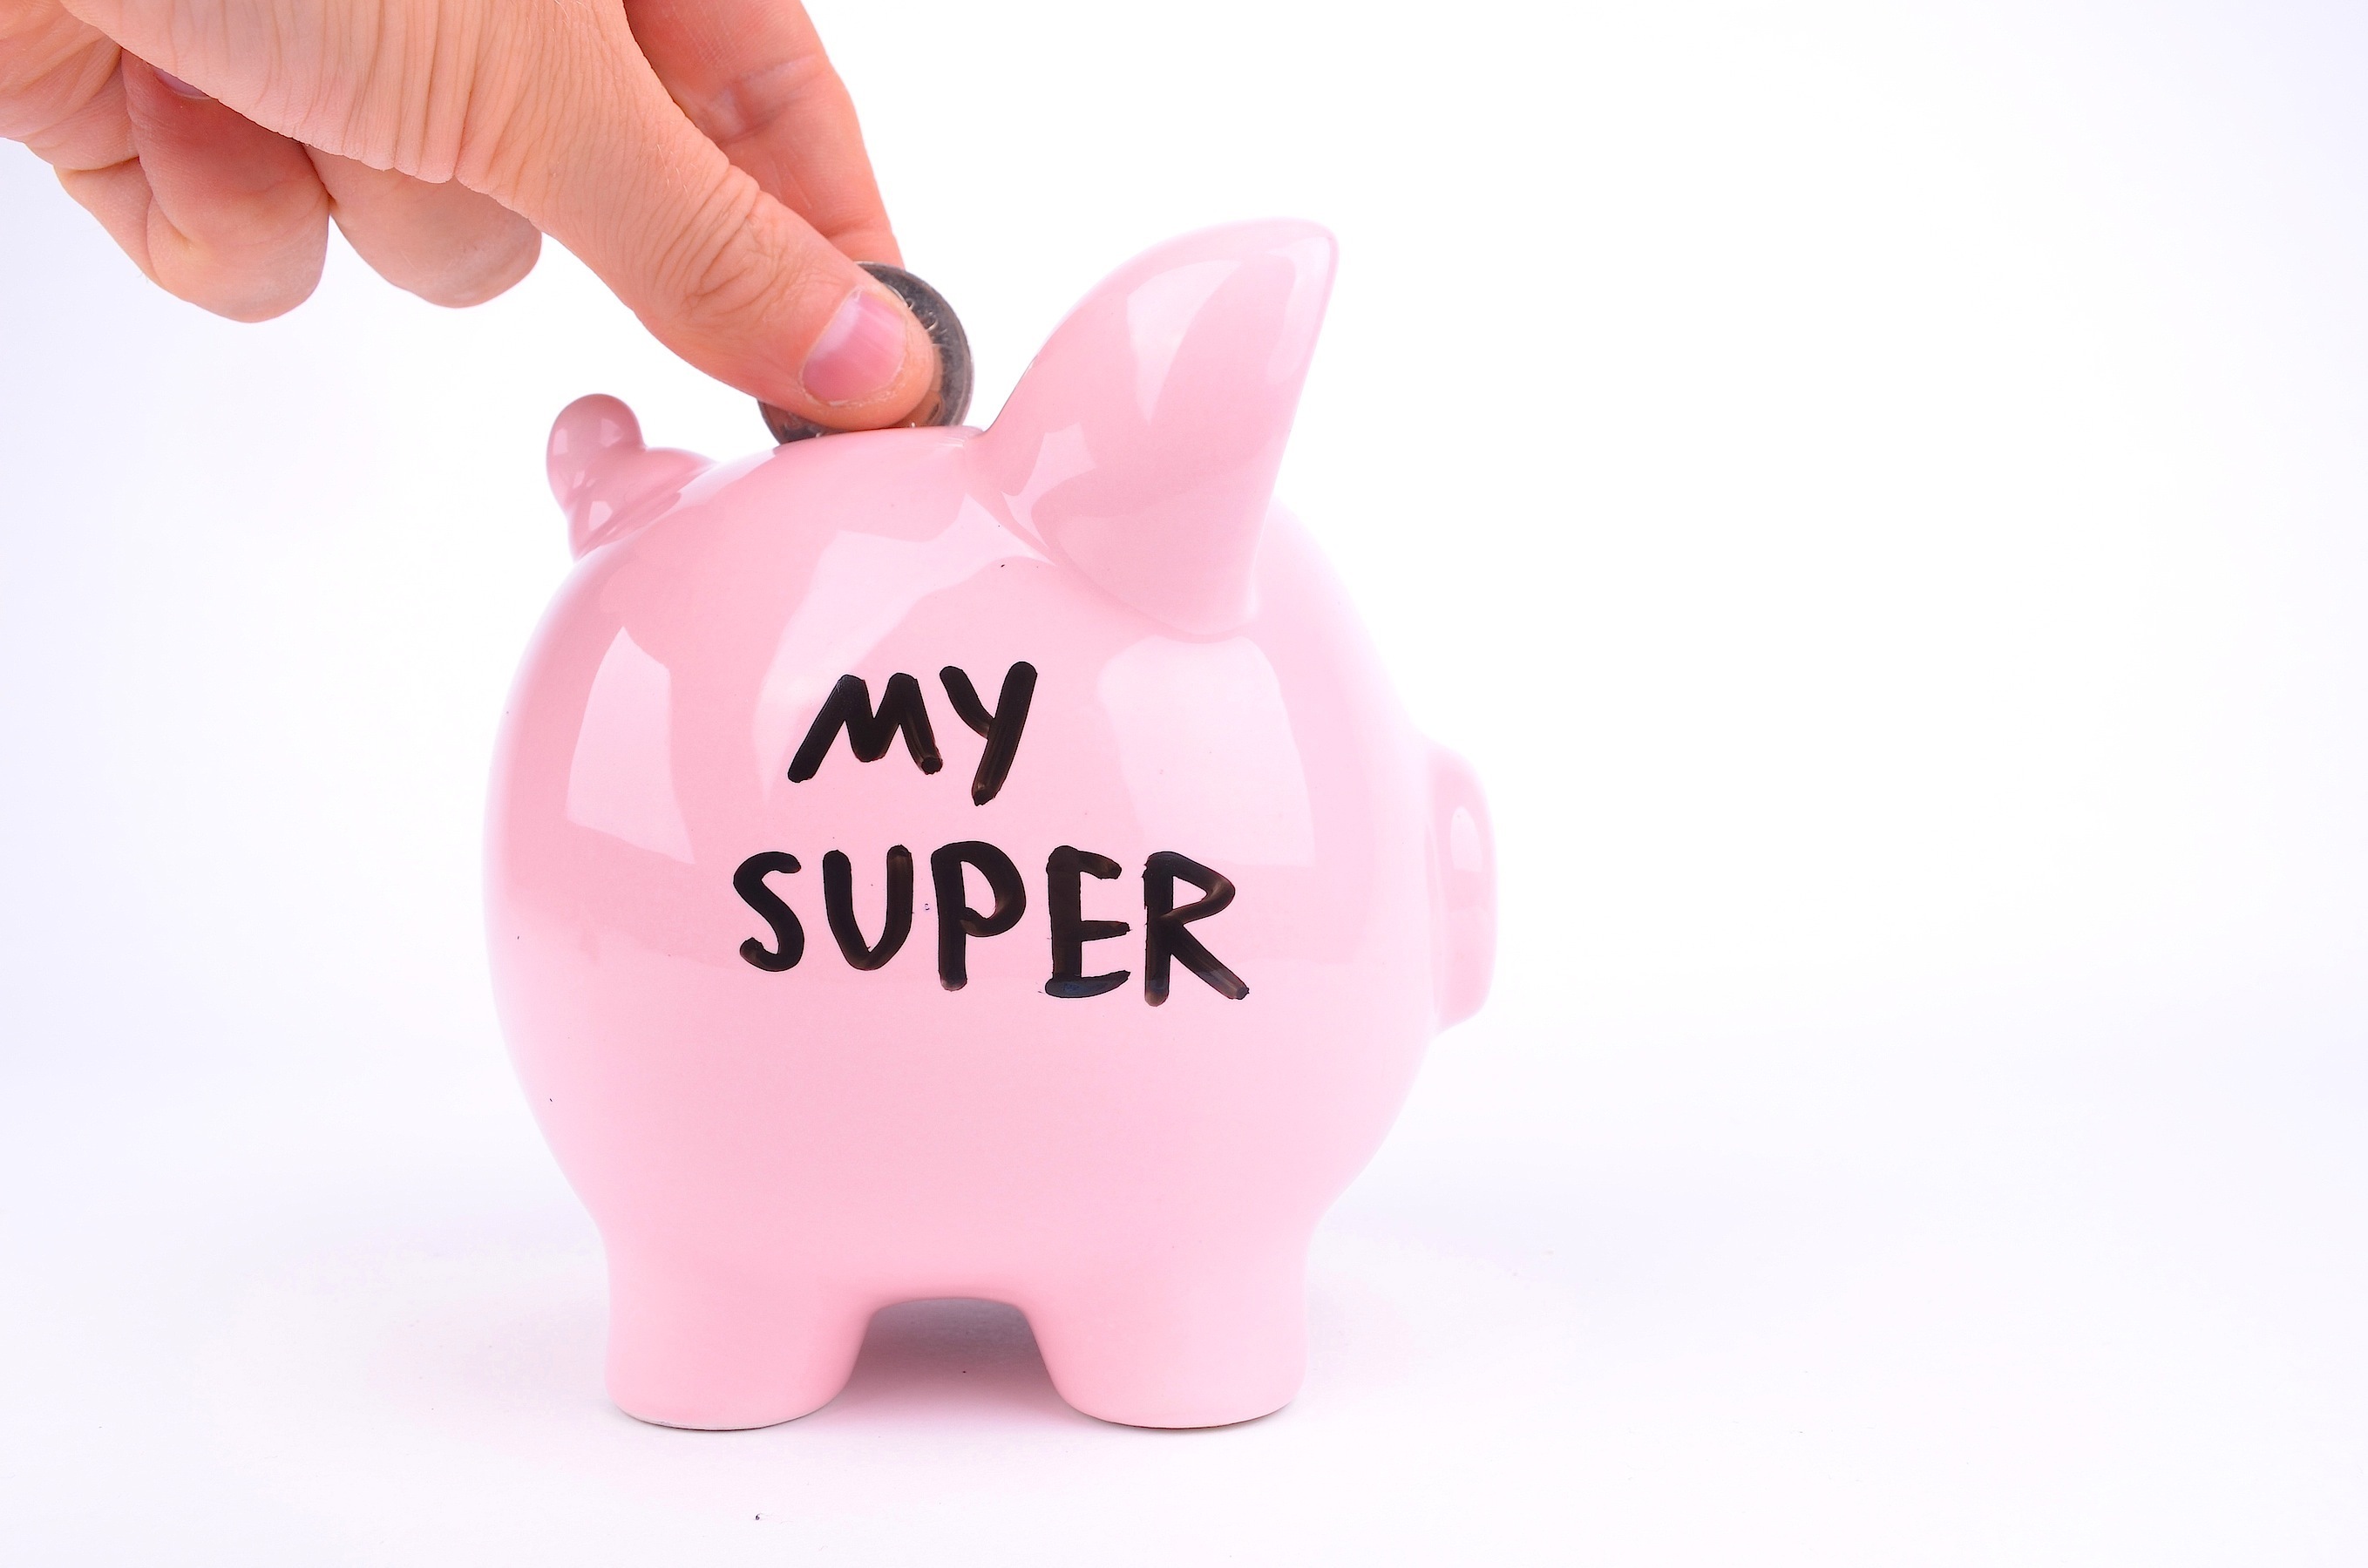 Early Access to your Superannuation - When and How